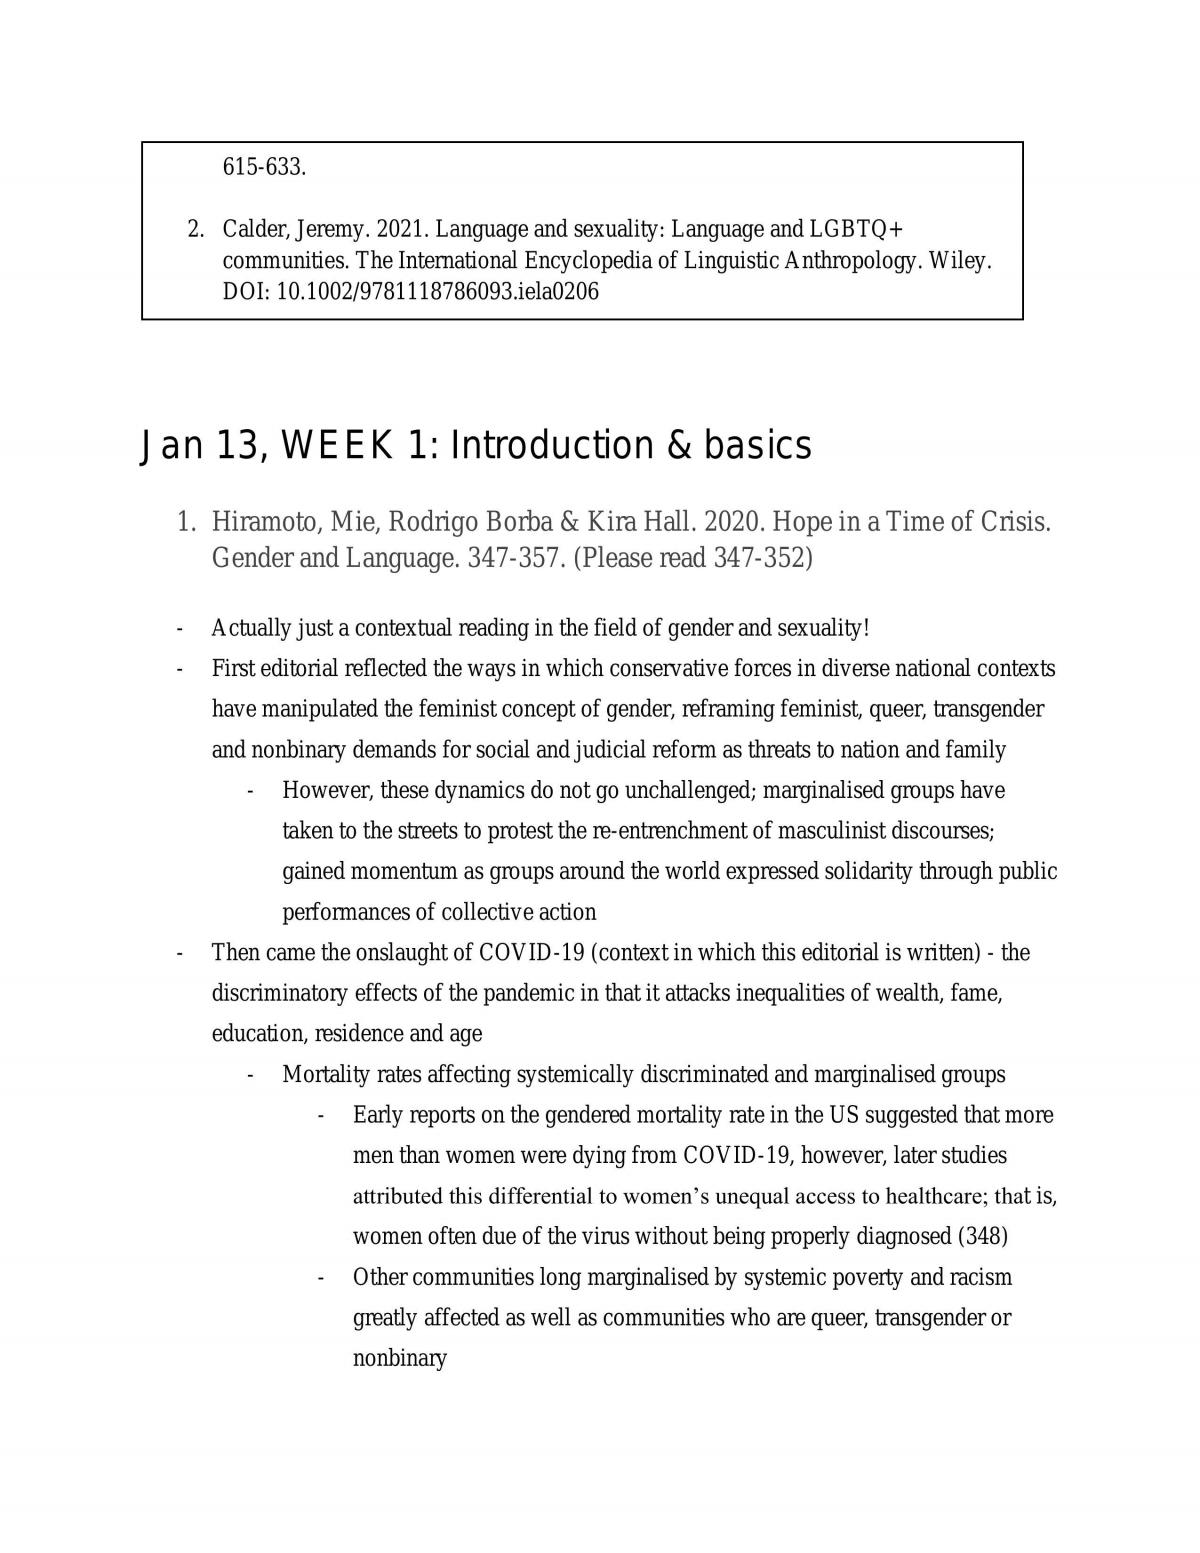 Language, Gender, and Text Revision Notes - Page 3